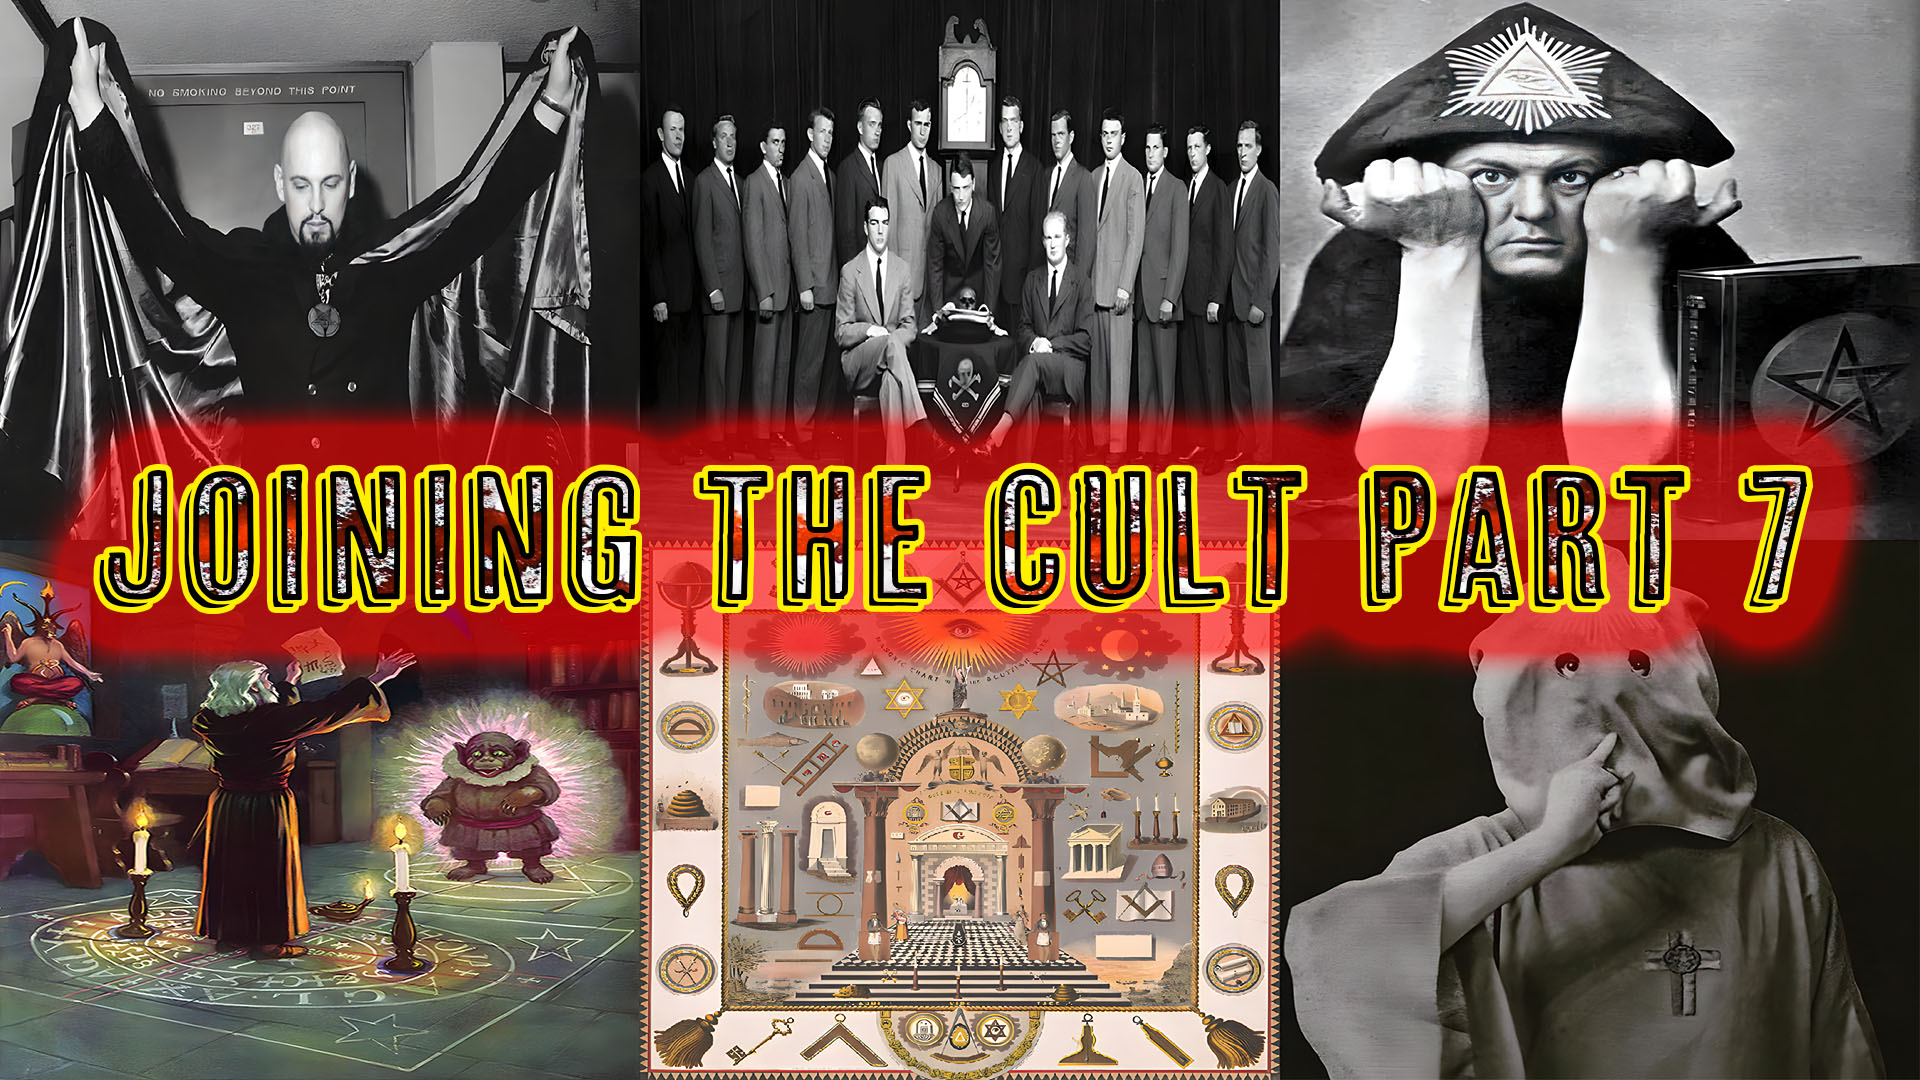 Joining The Cult Part 7 occult freemason satanists aleister crowley anton lavey john dee summoning a demon with skull and bones all represented in The Popular Cult